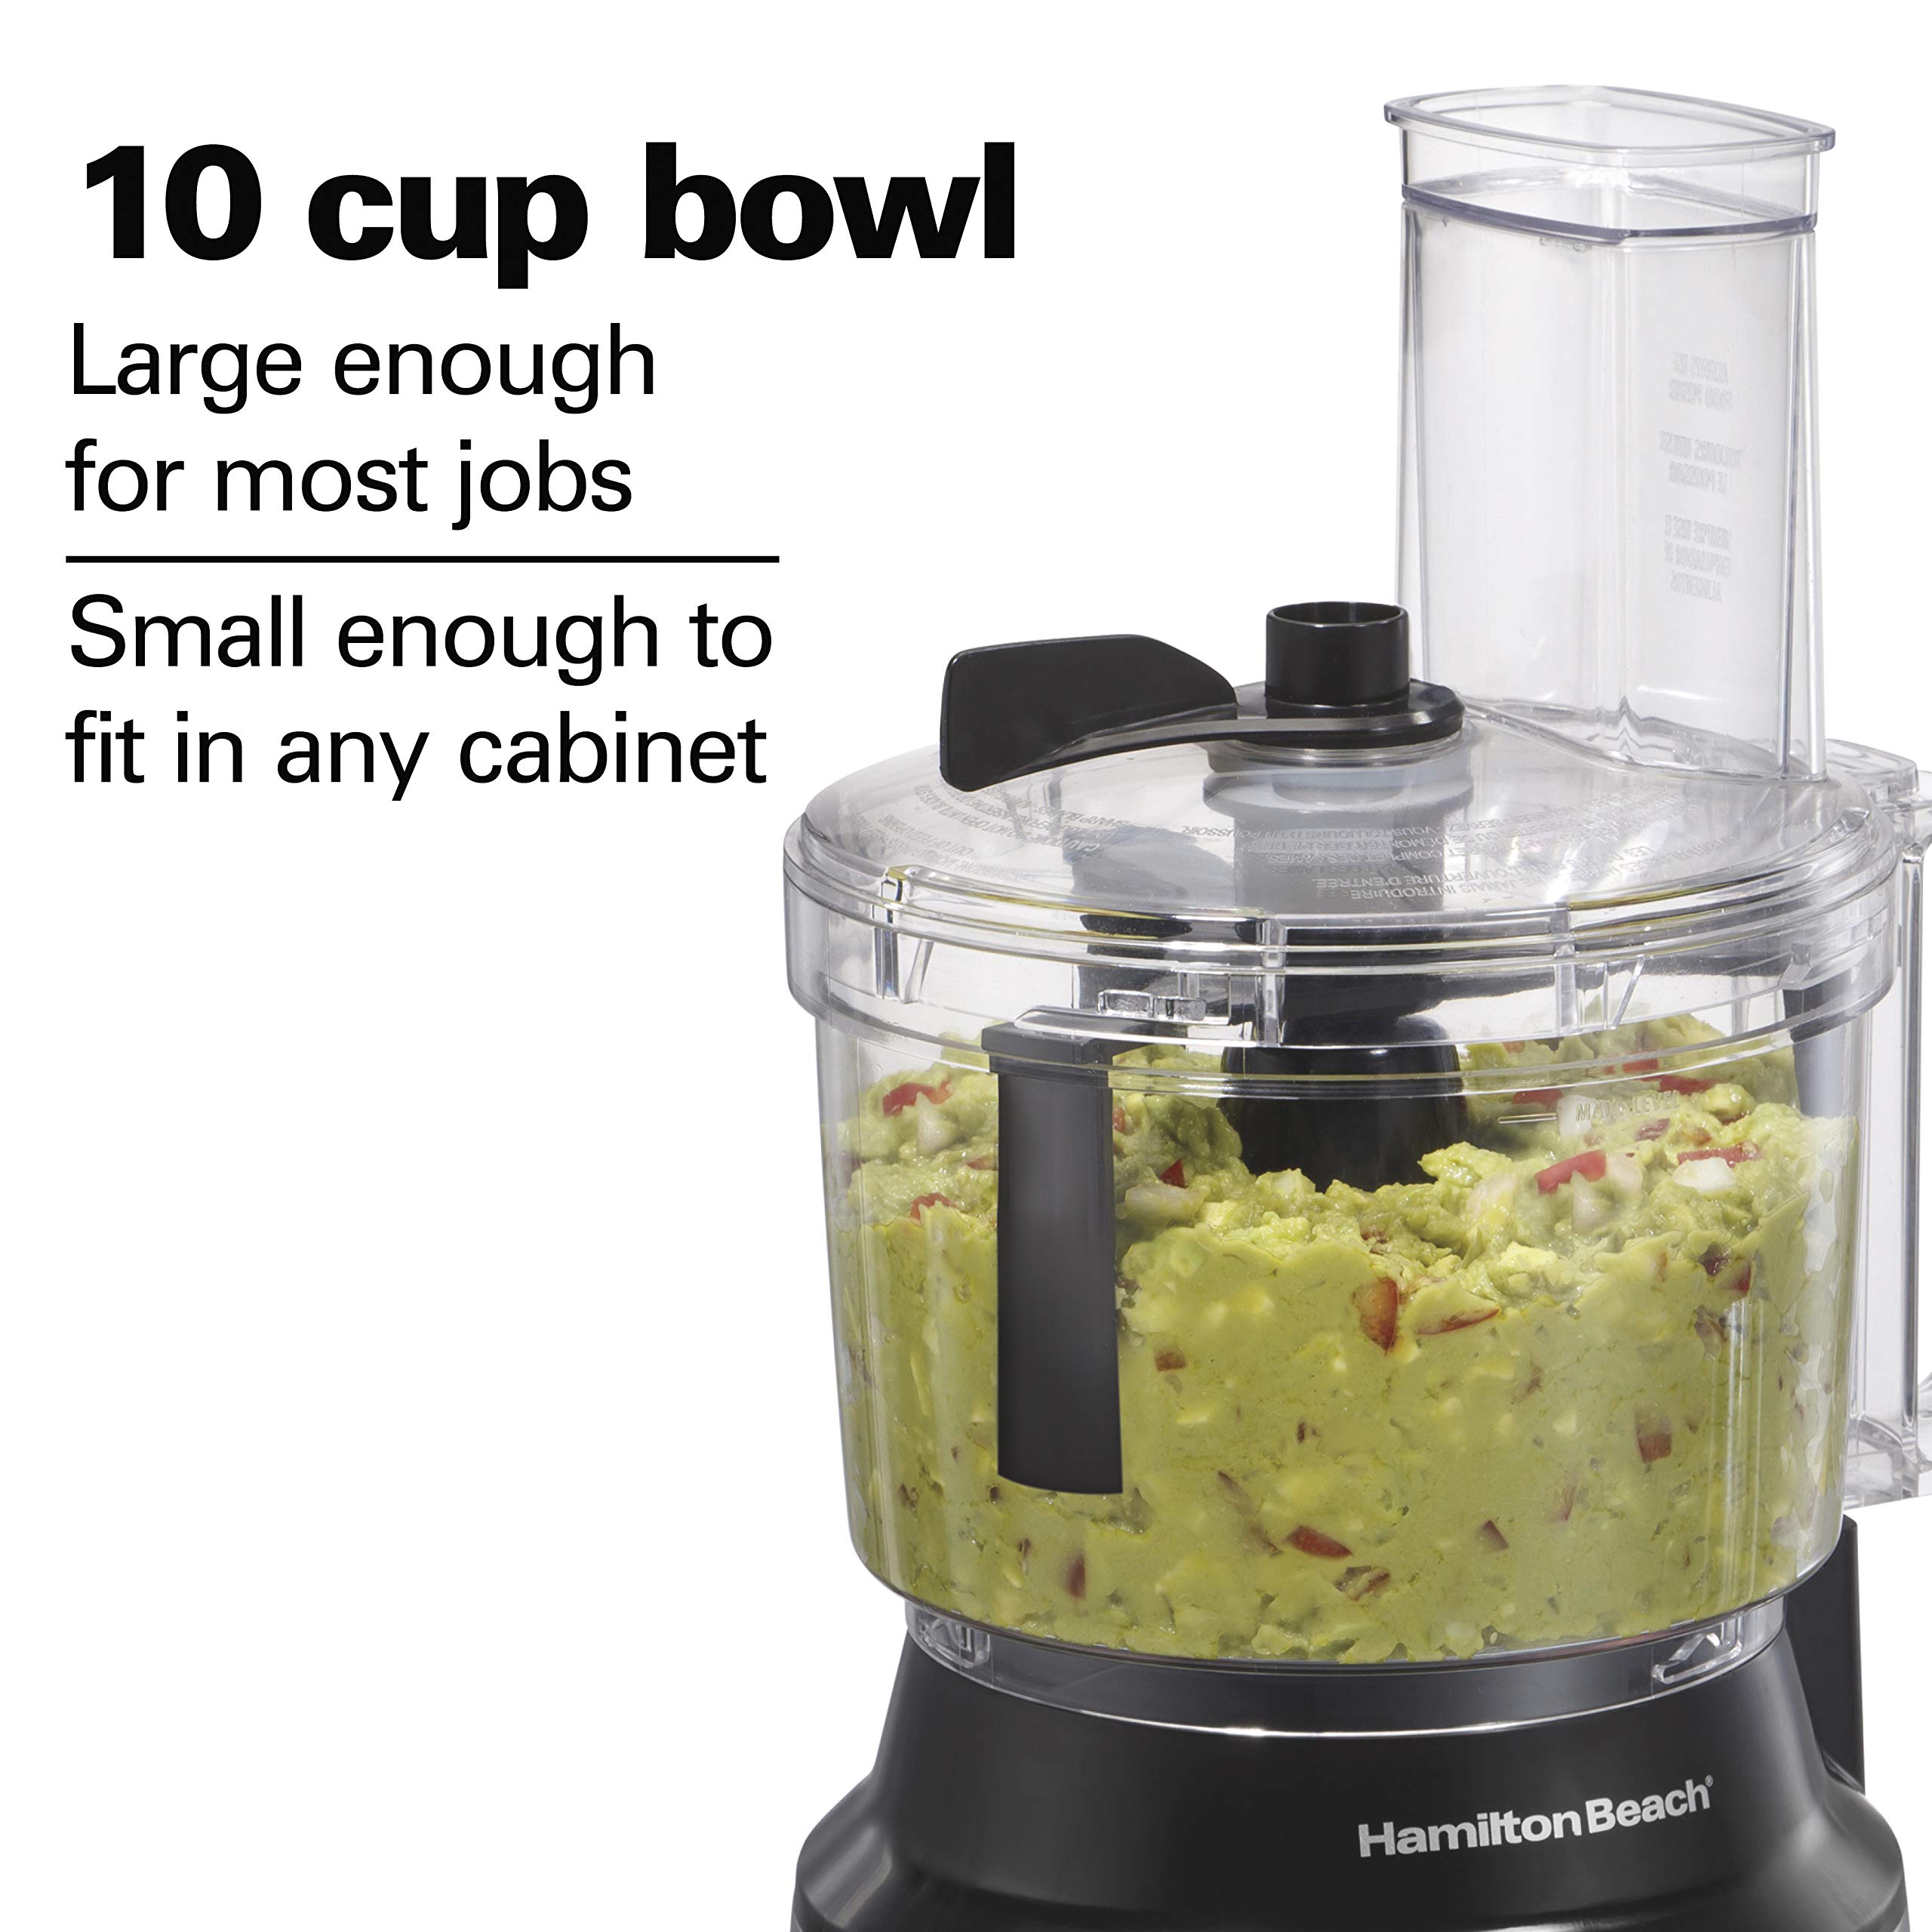 Hamilton Beach Food Processor & Vegetable Chopper for Slicing, Shredding, Mincing, and Puree, 10 Cups + Easy Clean Bowl Scraper, Stainless Steel (70730)